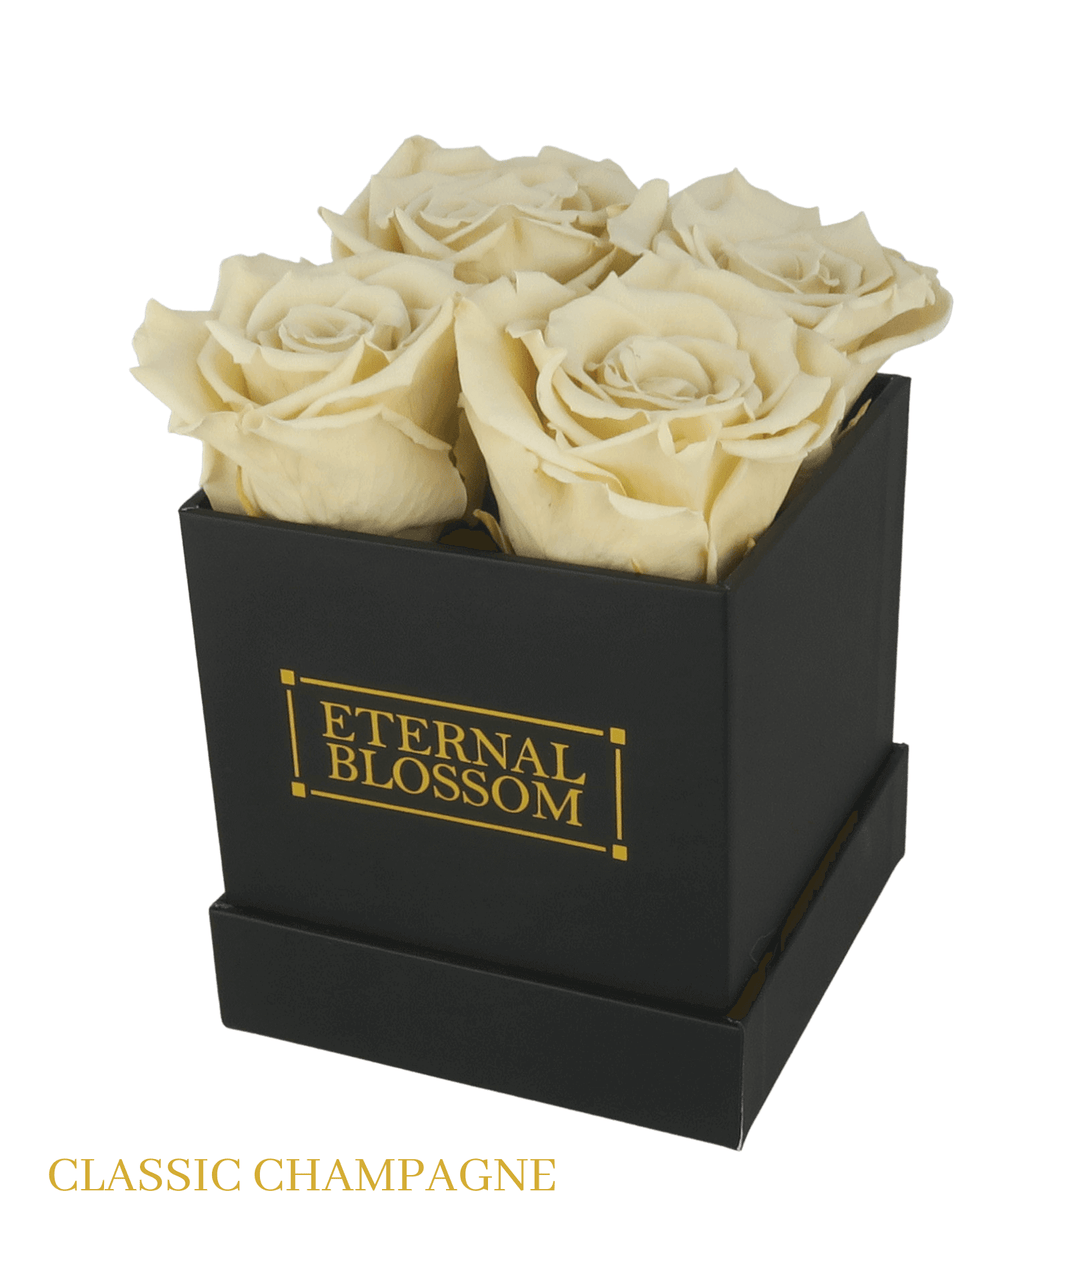 4 Piece Blossom Box - Black Box - All Colours of Year Lasting Infinity Roses - Eternal Blossom